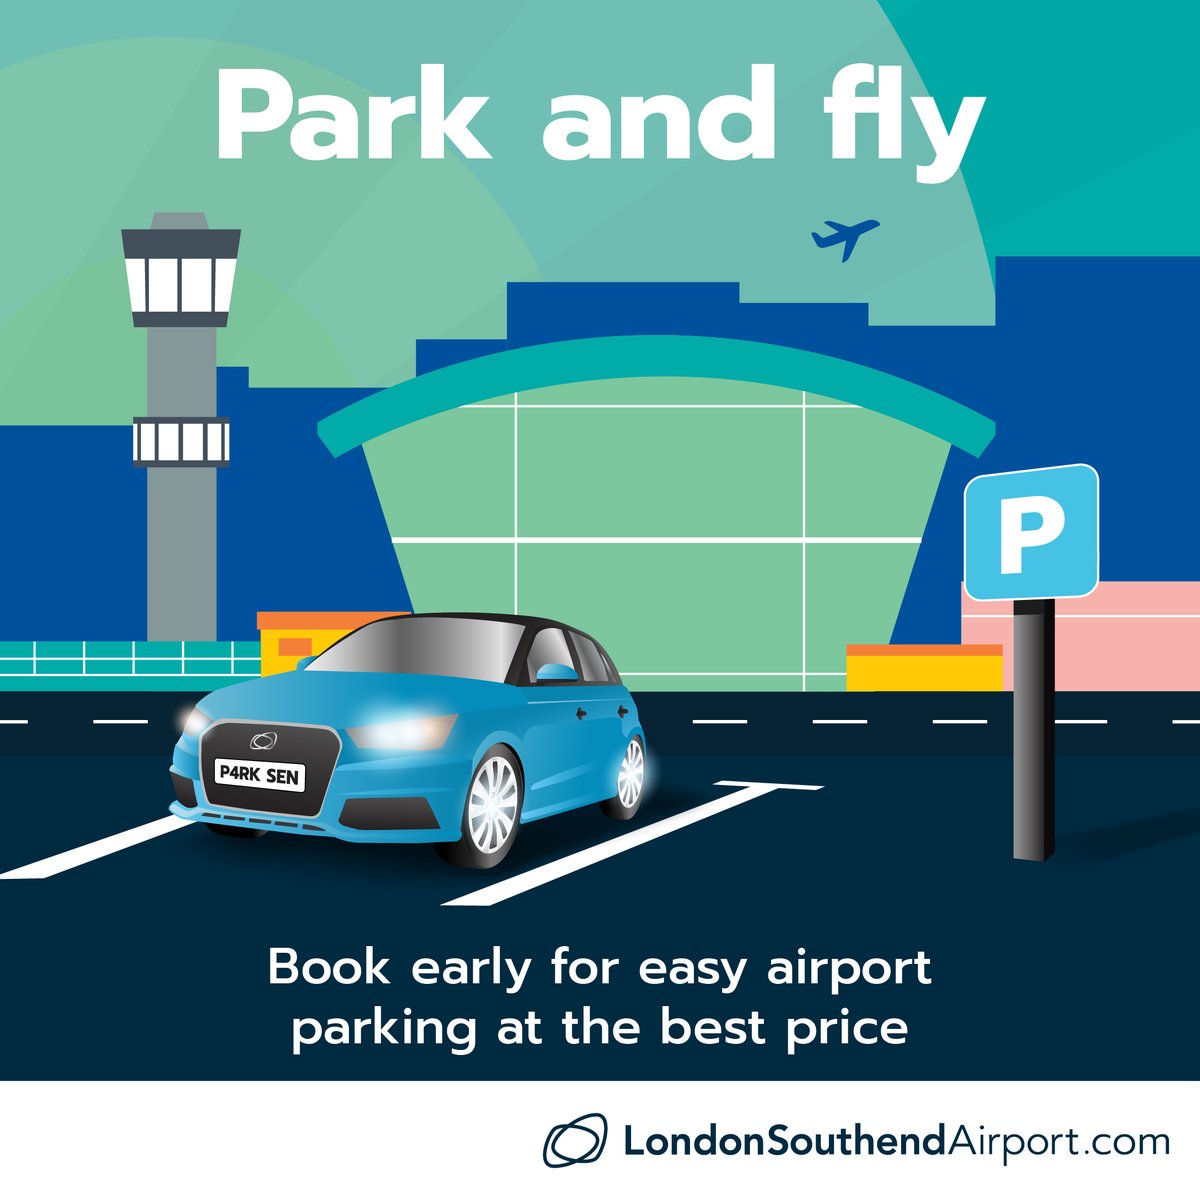 QUICK, EASY, CLOSE on-site parking at London Southend Airport 🚙🚘 Book online for our lowest price guarantee ✈️ #FlyLondonSouthend

👉 londonsouthendairport.com/getting-to-and…